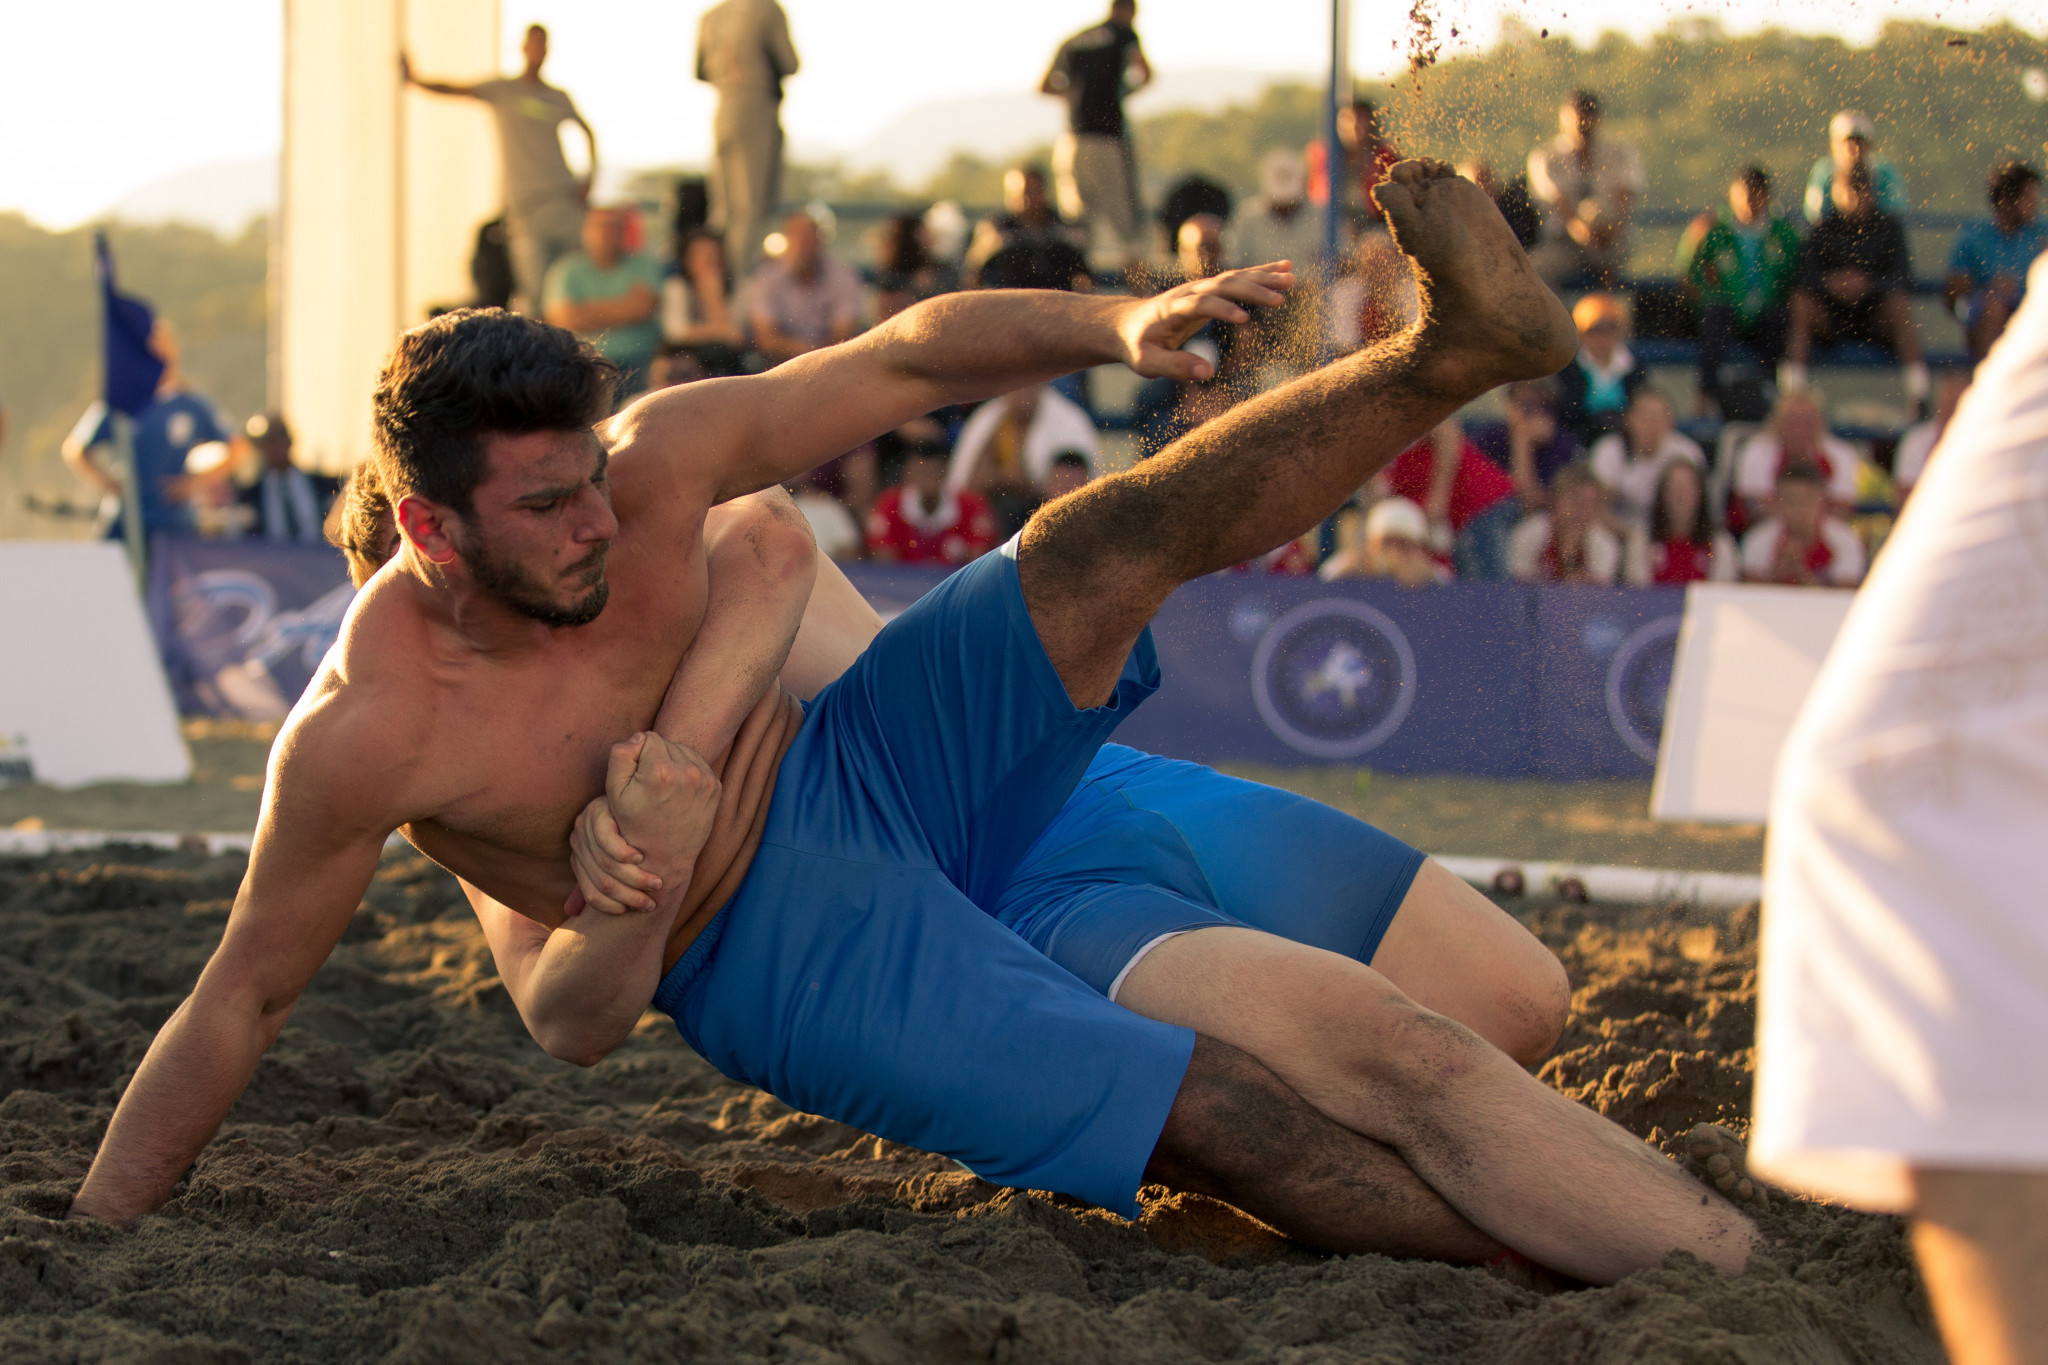 A Beach Wrestling World Series has been launched by UWW ©UWW